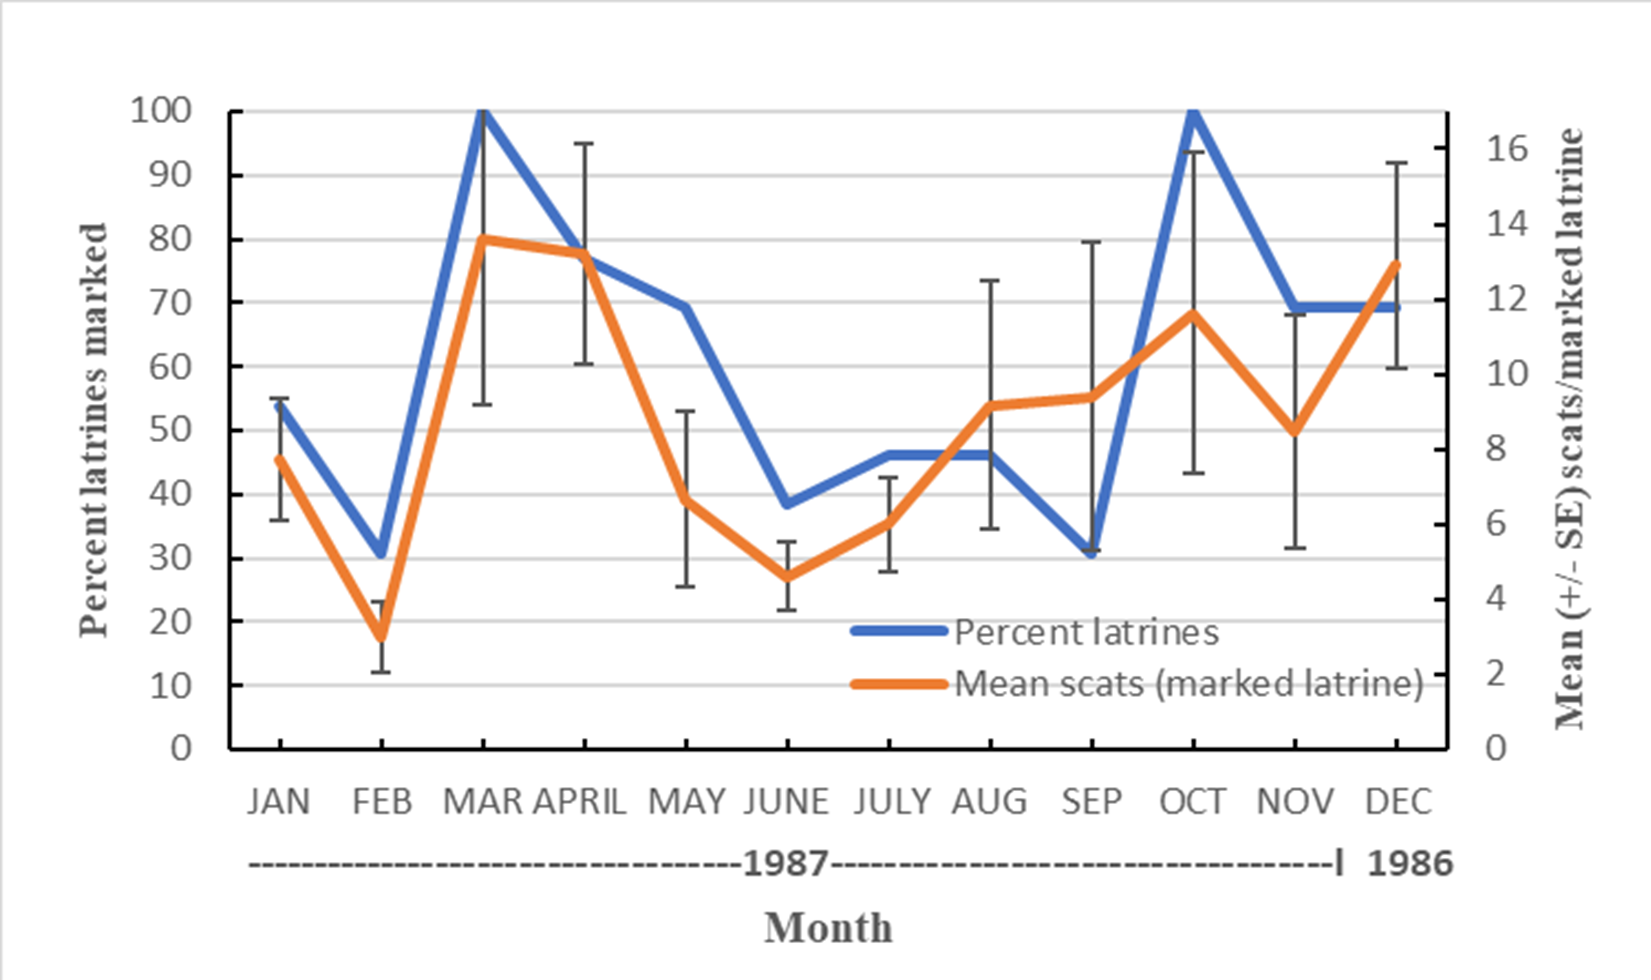 Chart with Months from January to November 1987, and a final point for December 1986. Percent Latrines Marked is on the left hand x axis (0 to 100), with the same line as on the previous chart.  On the right hand, the x axis is Mean Number of Scats per Marked Latrine (0-16), with its line at minimum (~3) in February, rising to its maximum (~14) in March, declining slightly and hten steeply to around 5 in June, rising again to about 12 in October, and falling in November; December 1986 is about 13.  Standard error bars are shown.